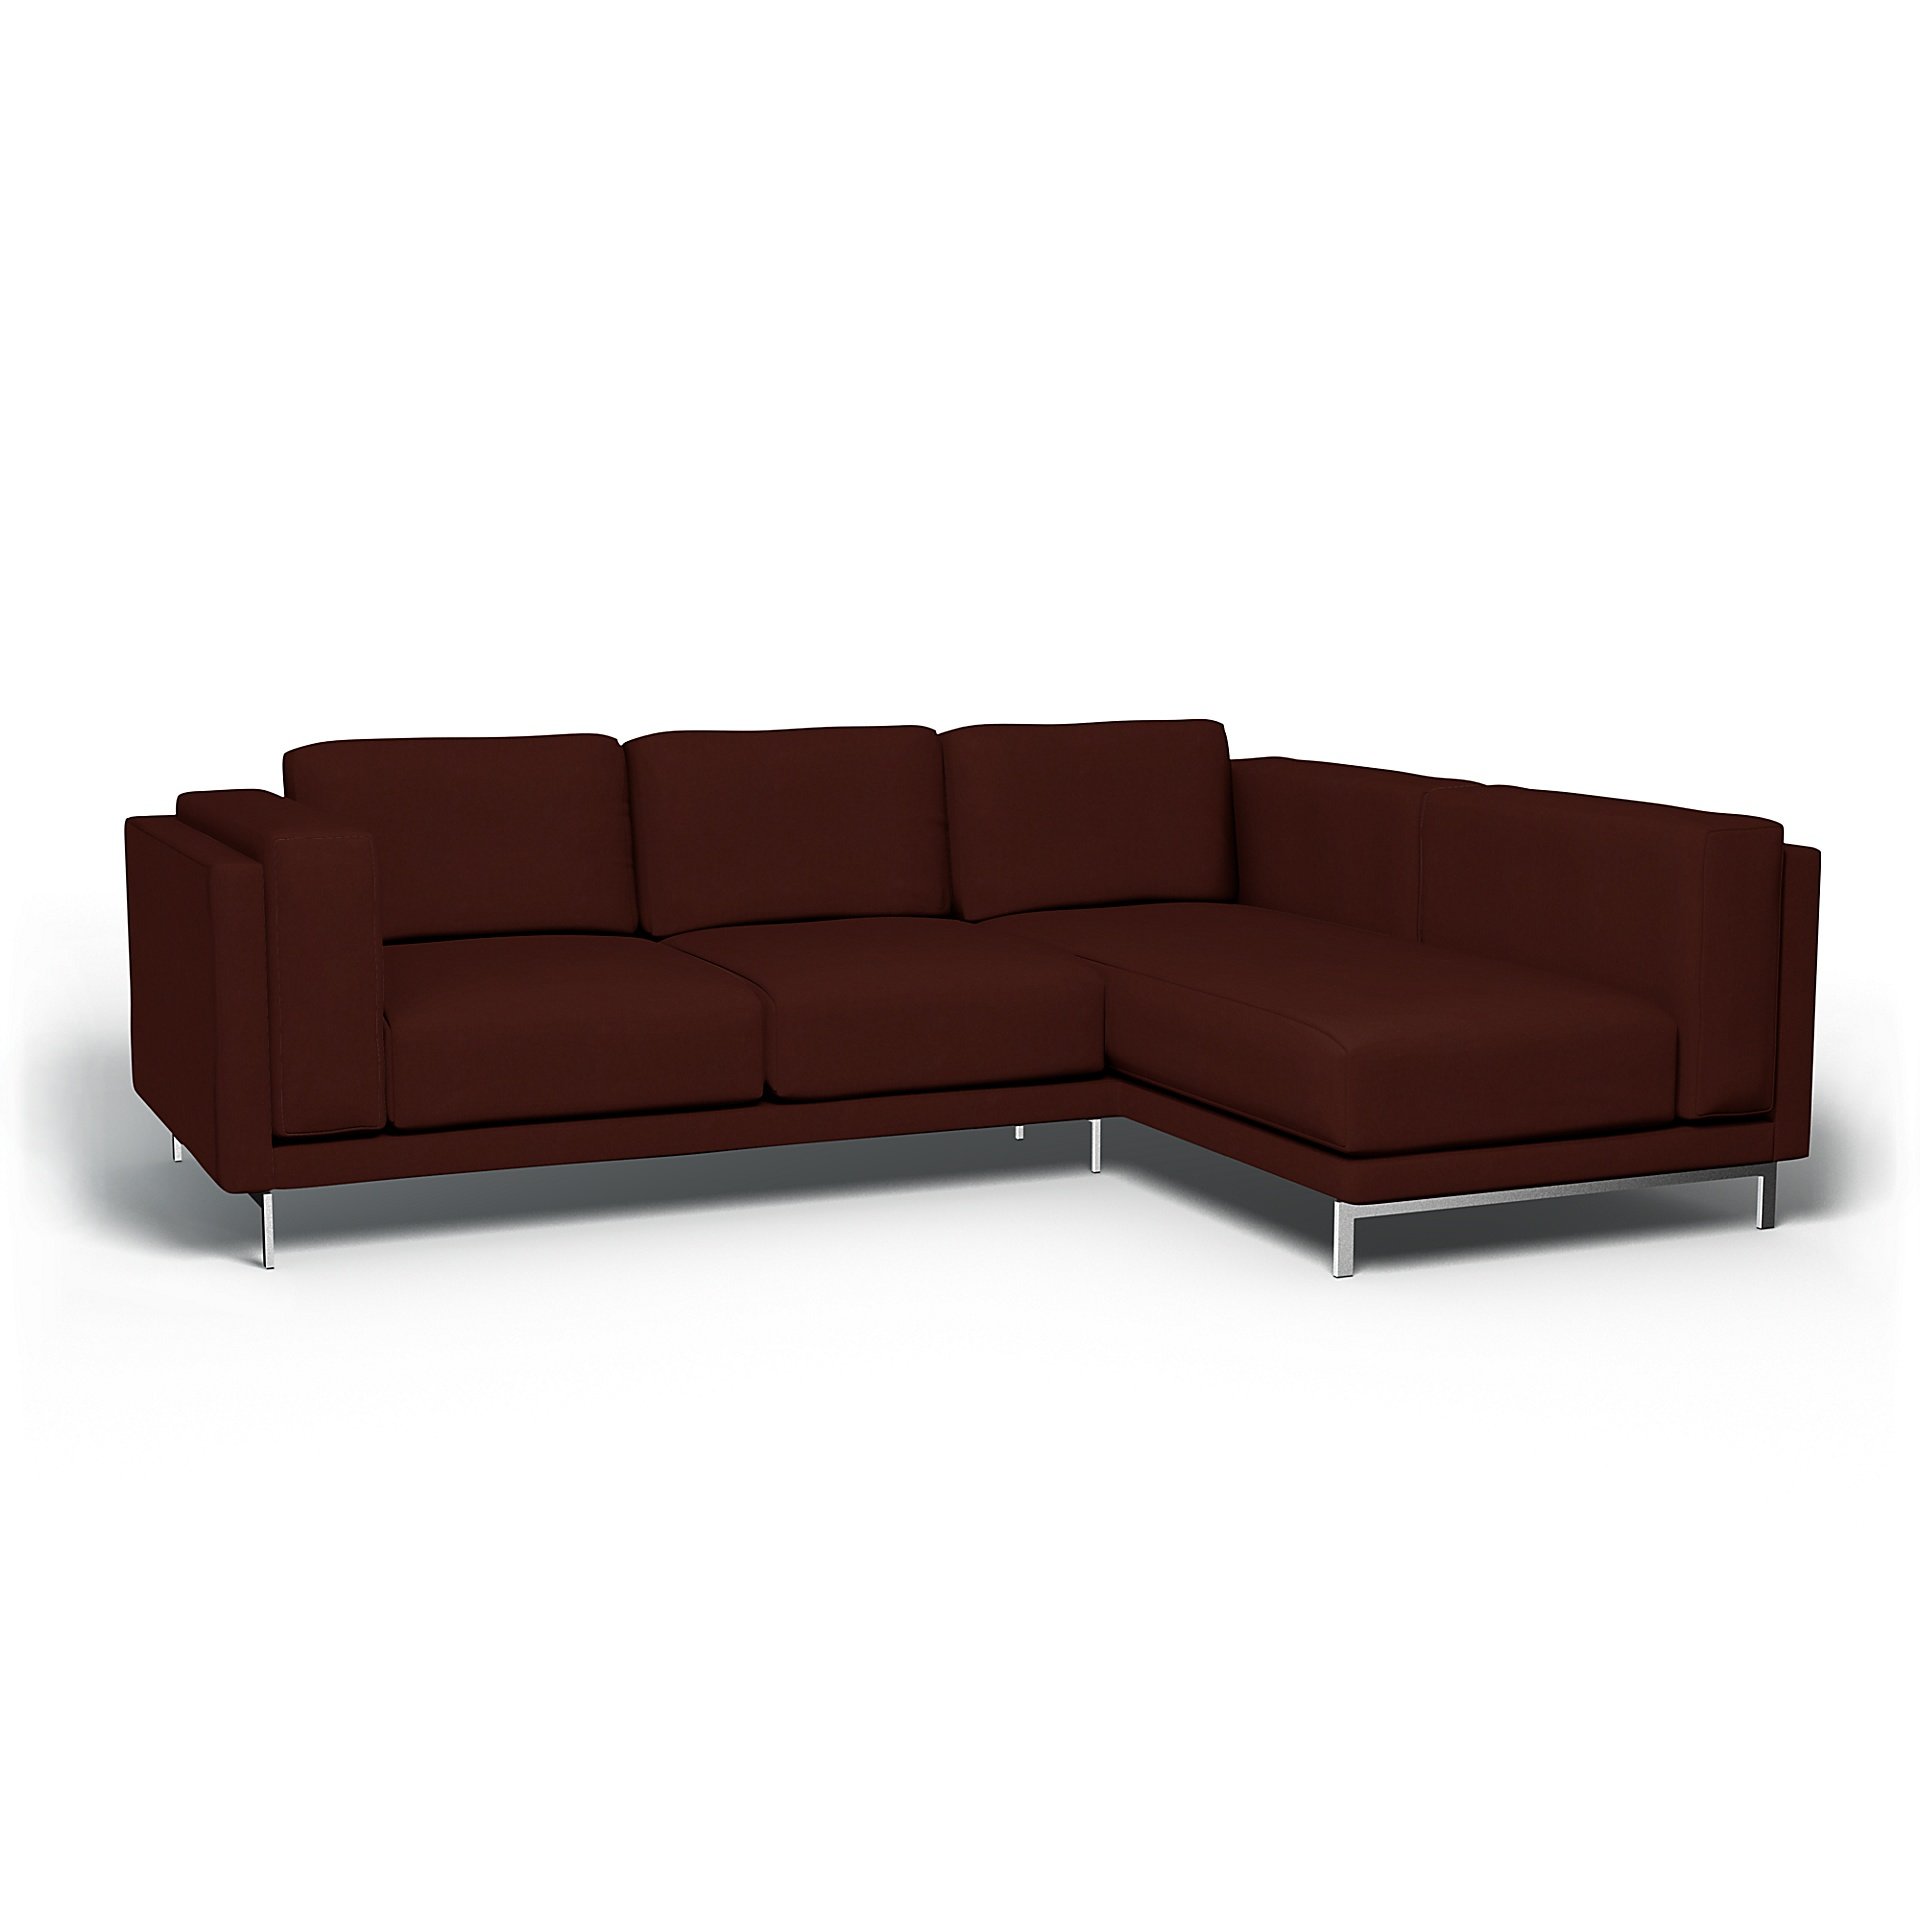 IKEA - Nockeby 3 Seat Sofa with Right Chaise Cover, Ground Coffee, Velvet - Bemz